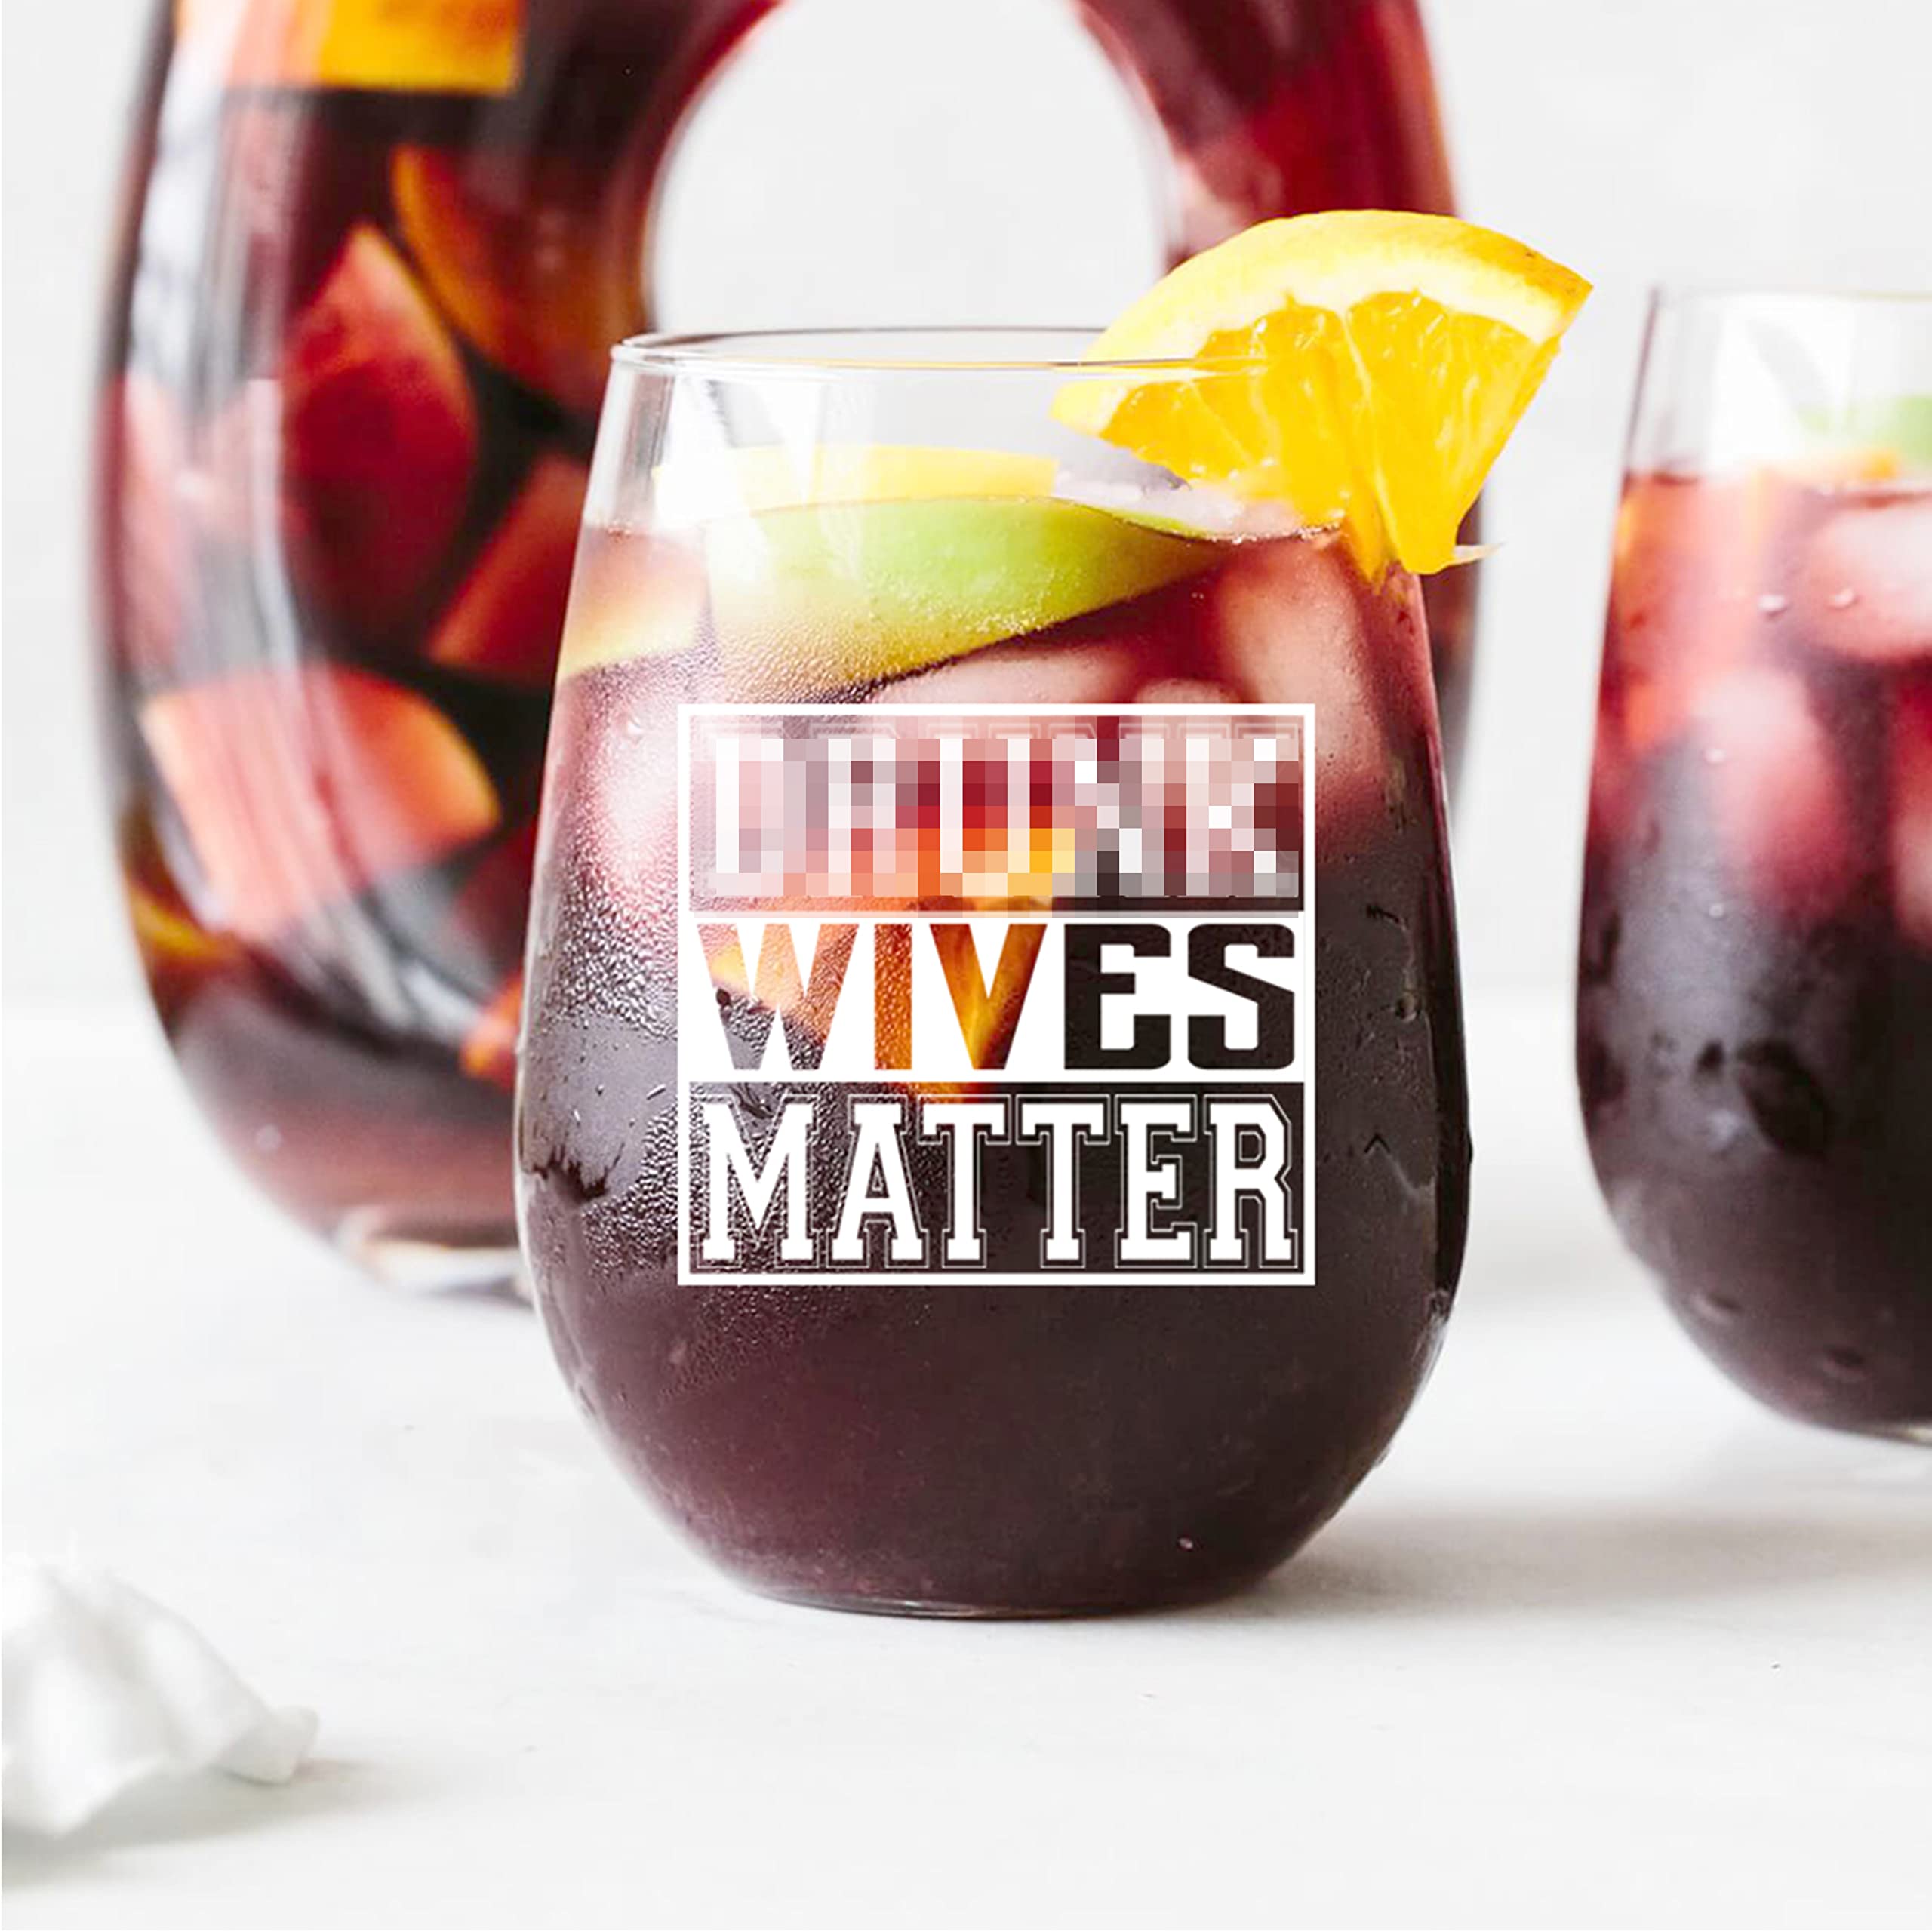 AGMDESIGN Wives Matte Funny Stemless Wine Glass, Premium Birthday Gifts for Women, Her, Sister, Wife, Boss, Mom, Aunt, BFF, Coworkers, Unique Present Idea from Husband to Wife